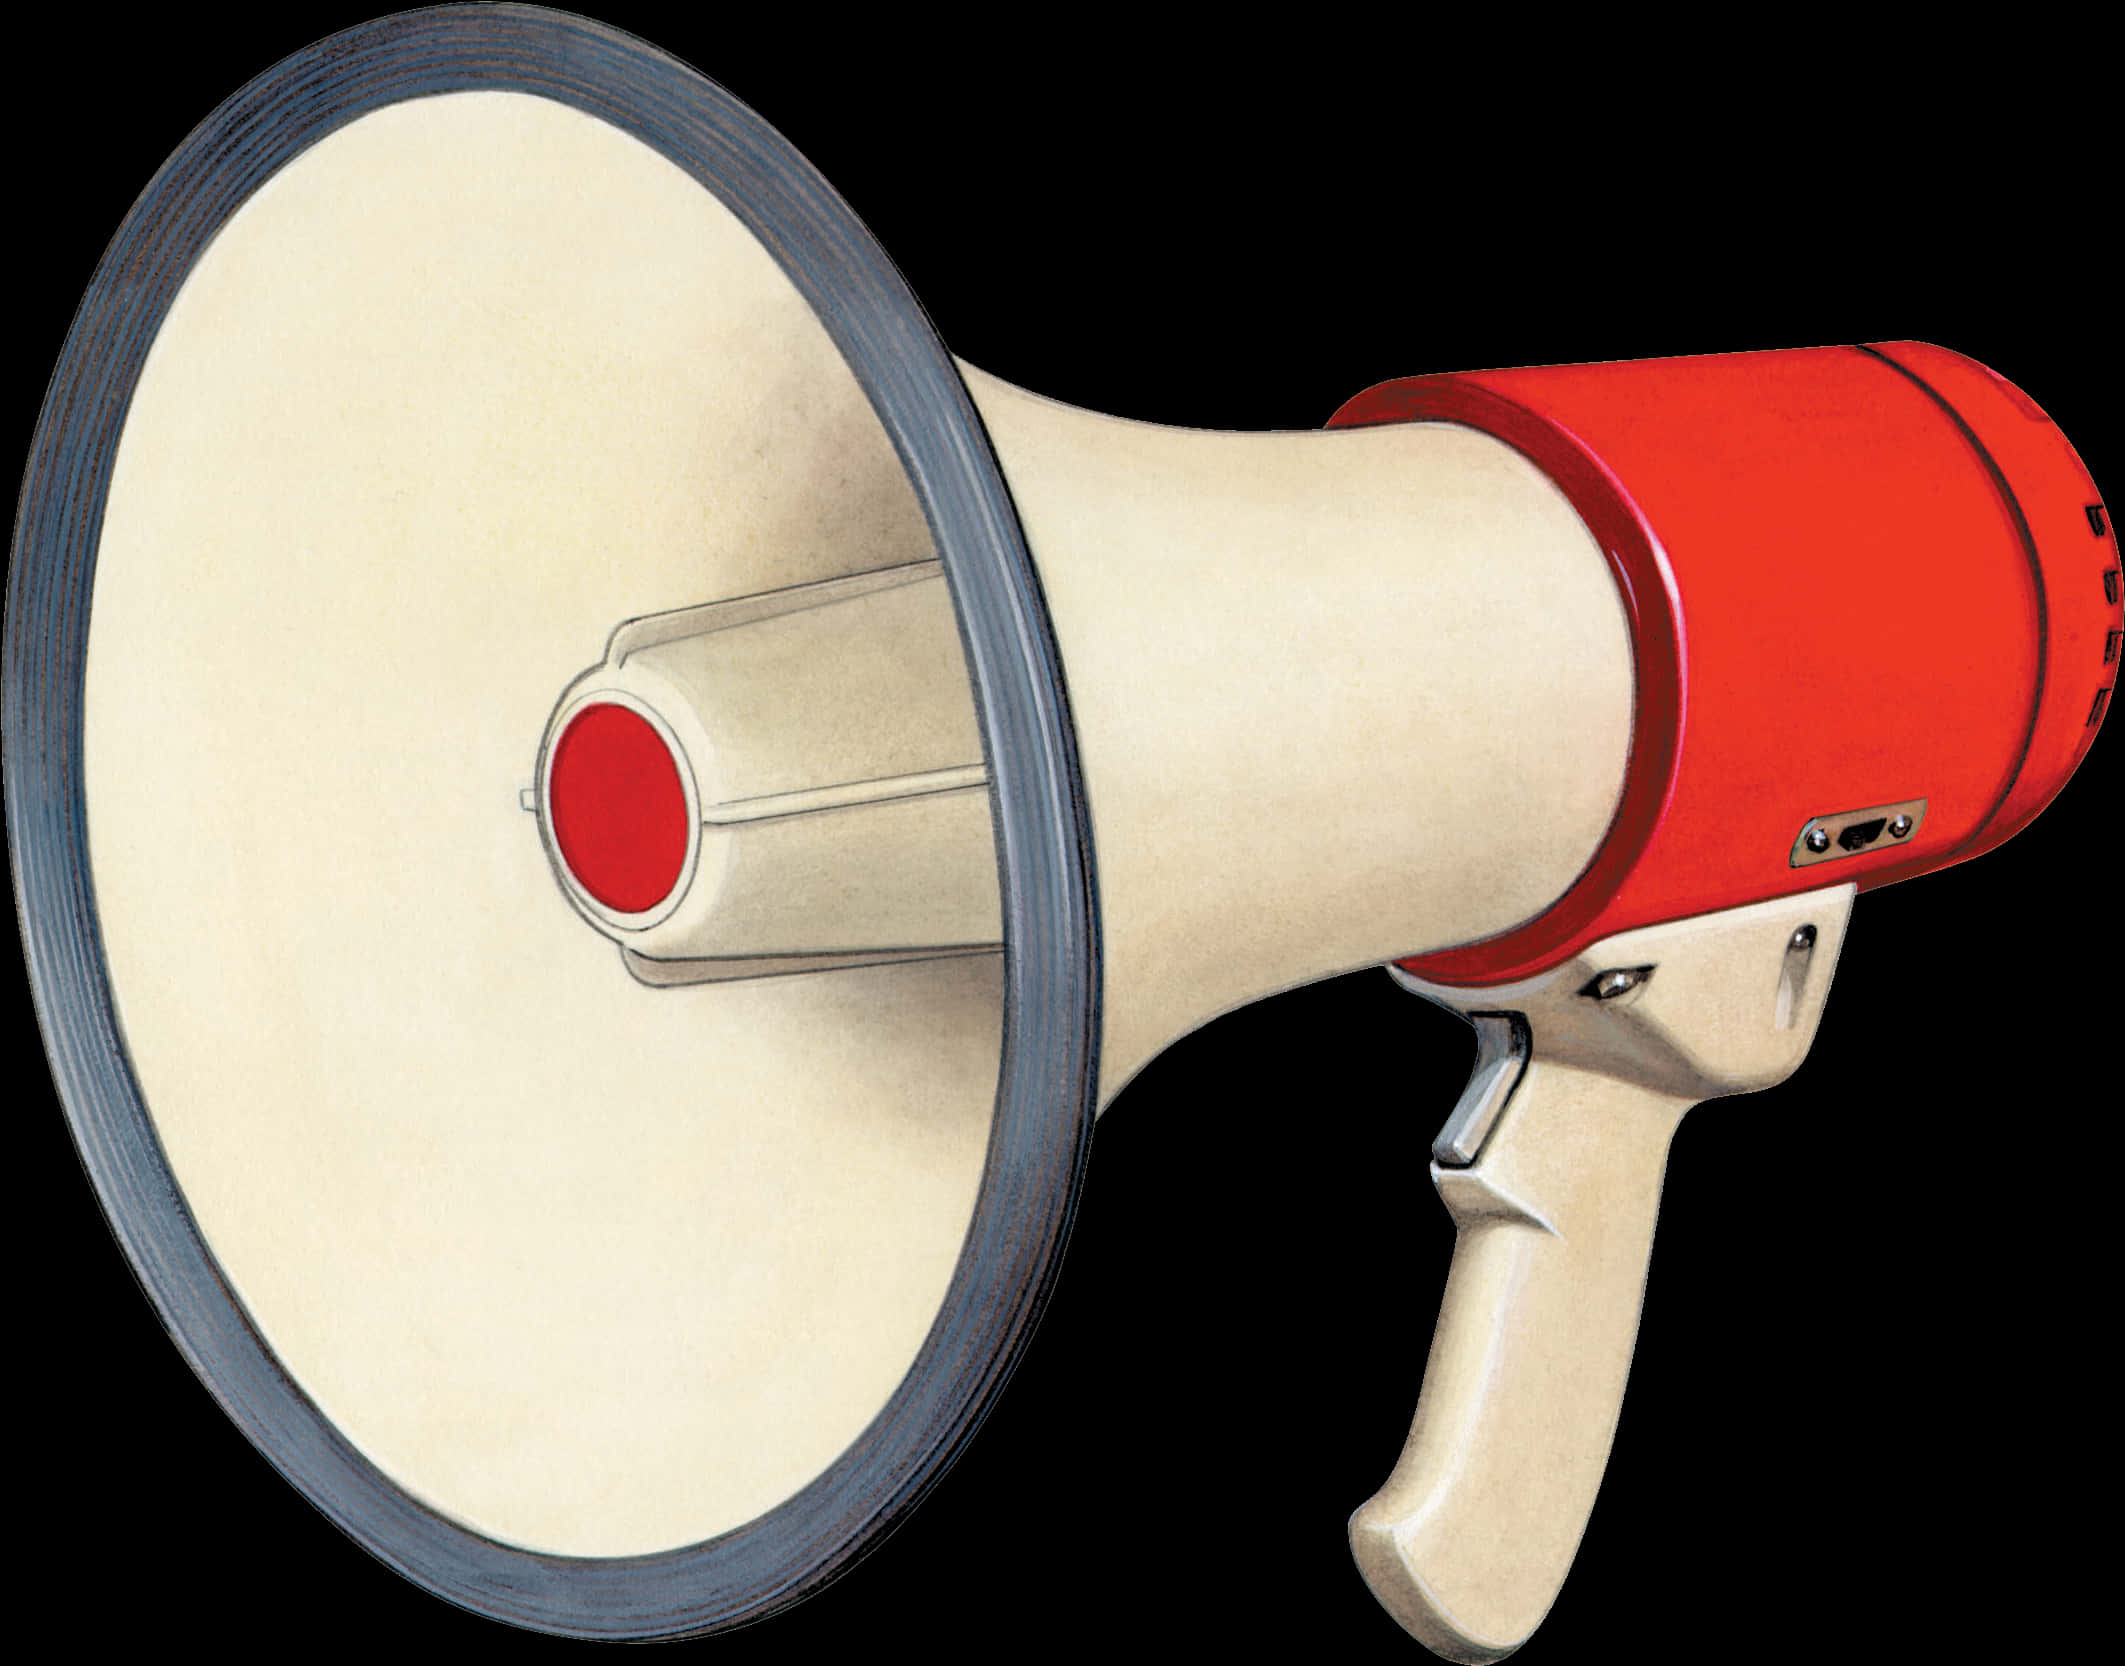 A Red And White Megaphone